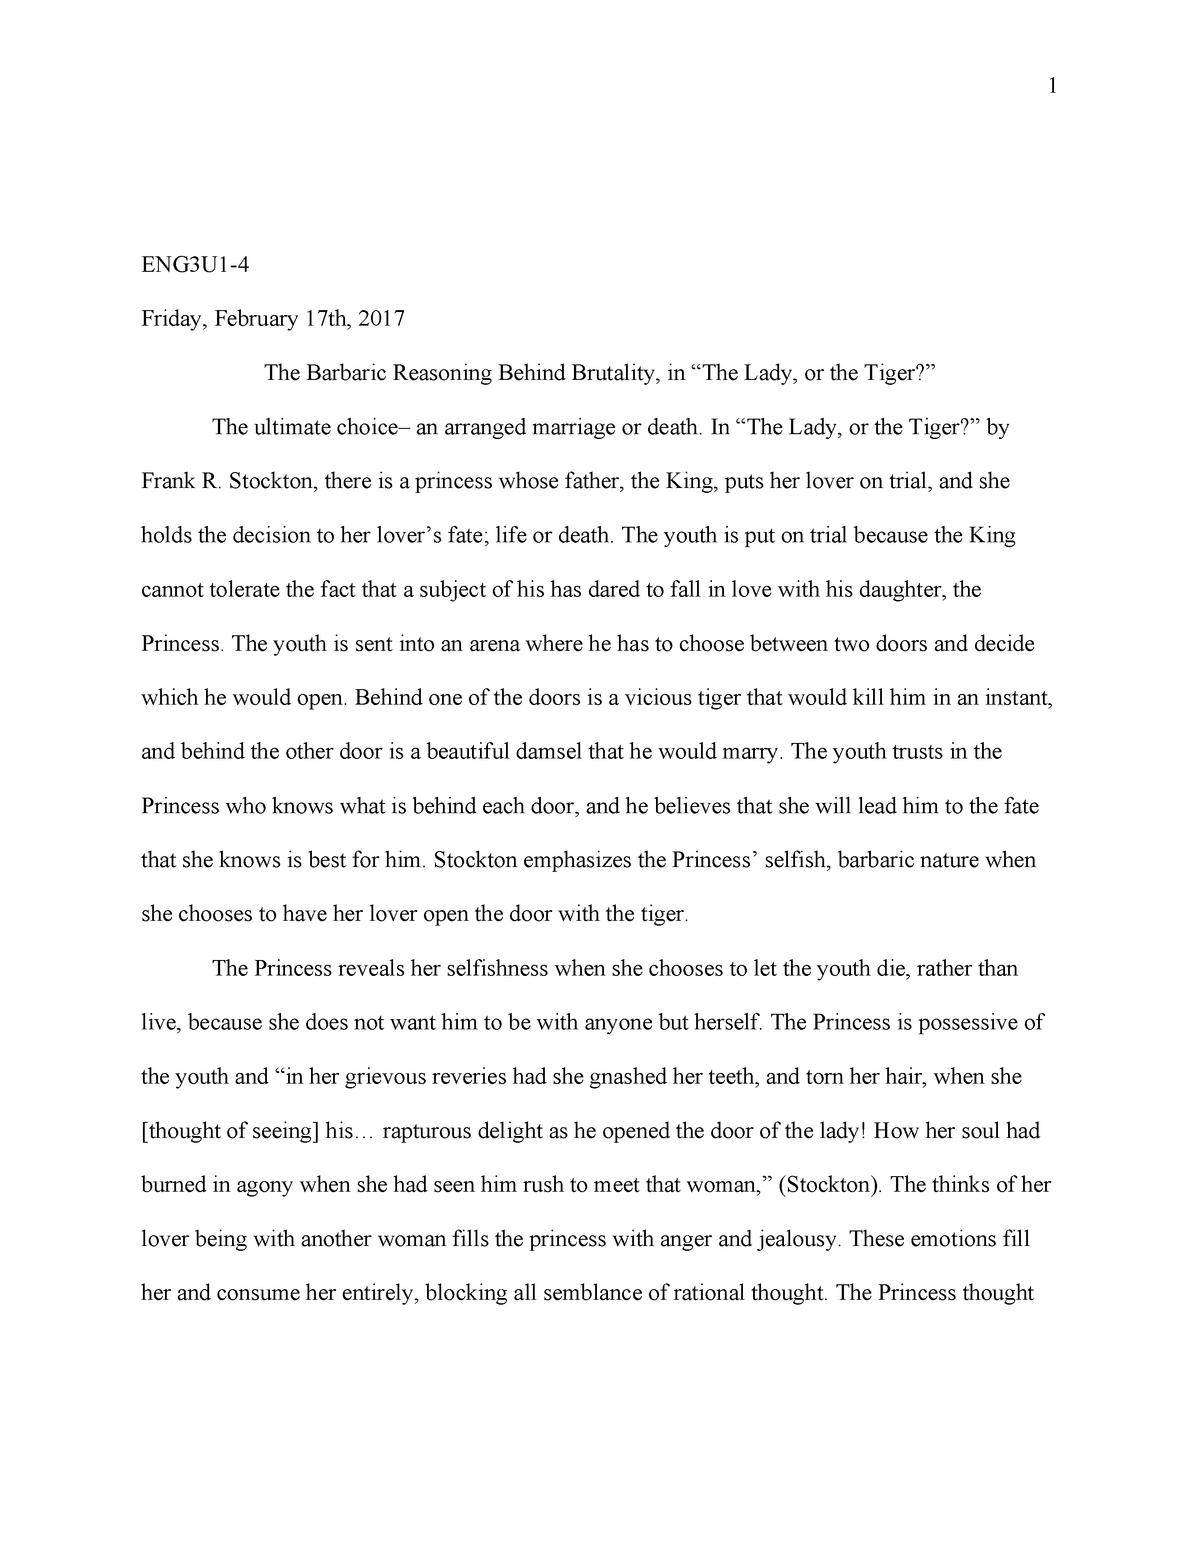 the lady or the tiger essay conclusion